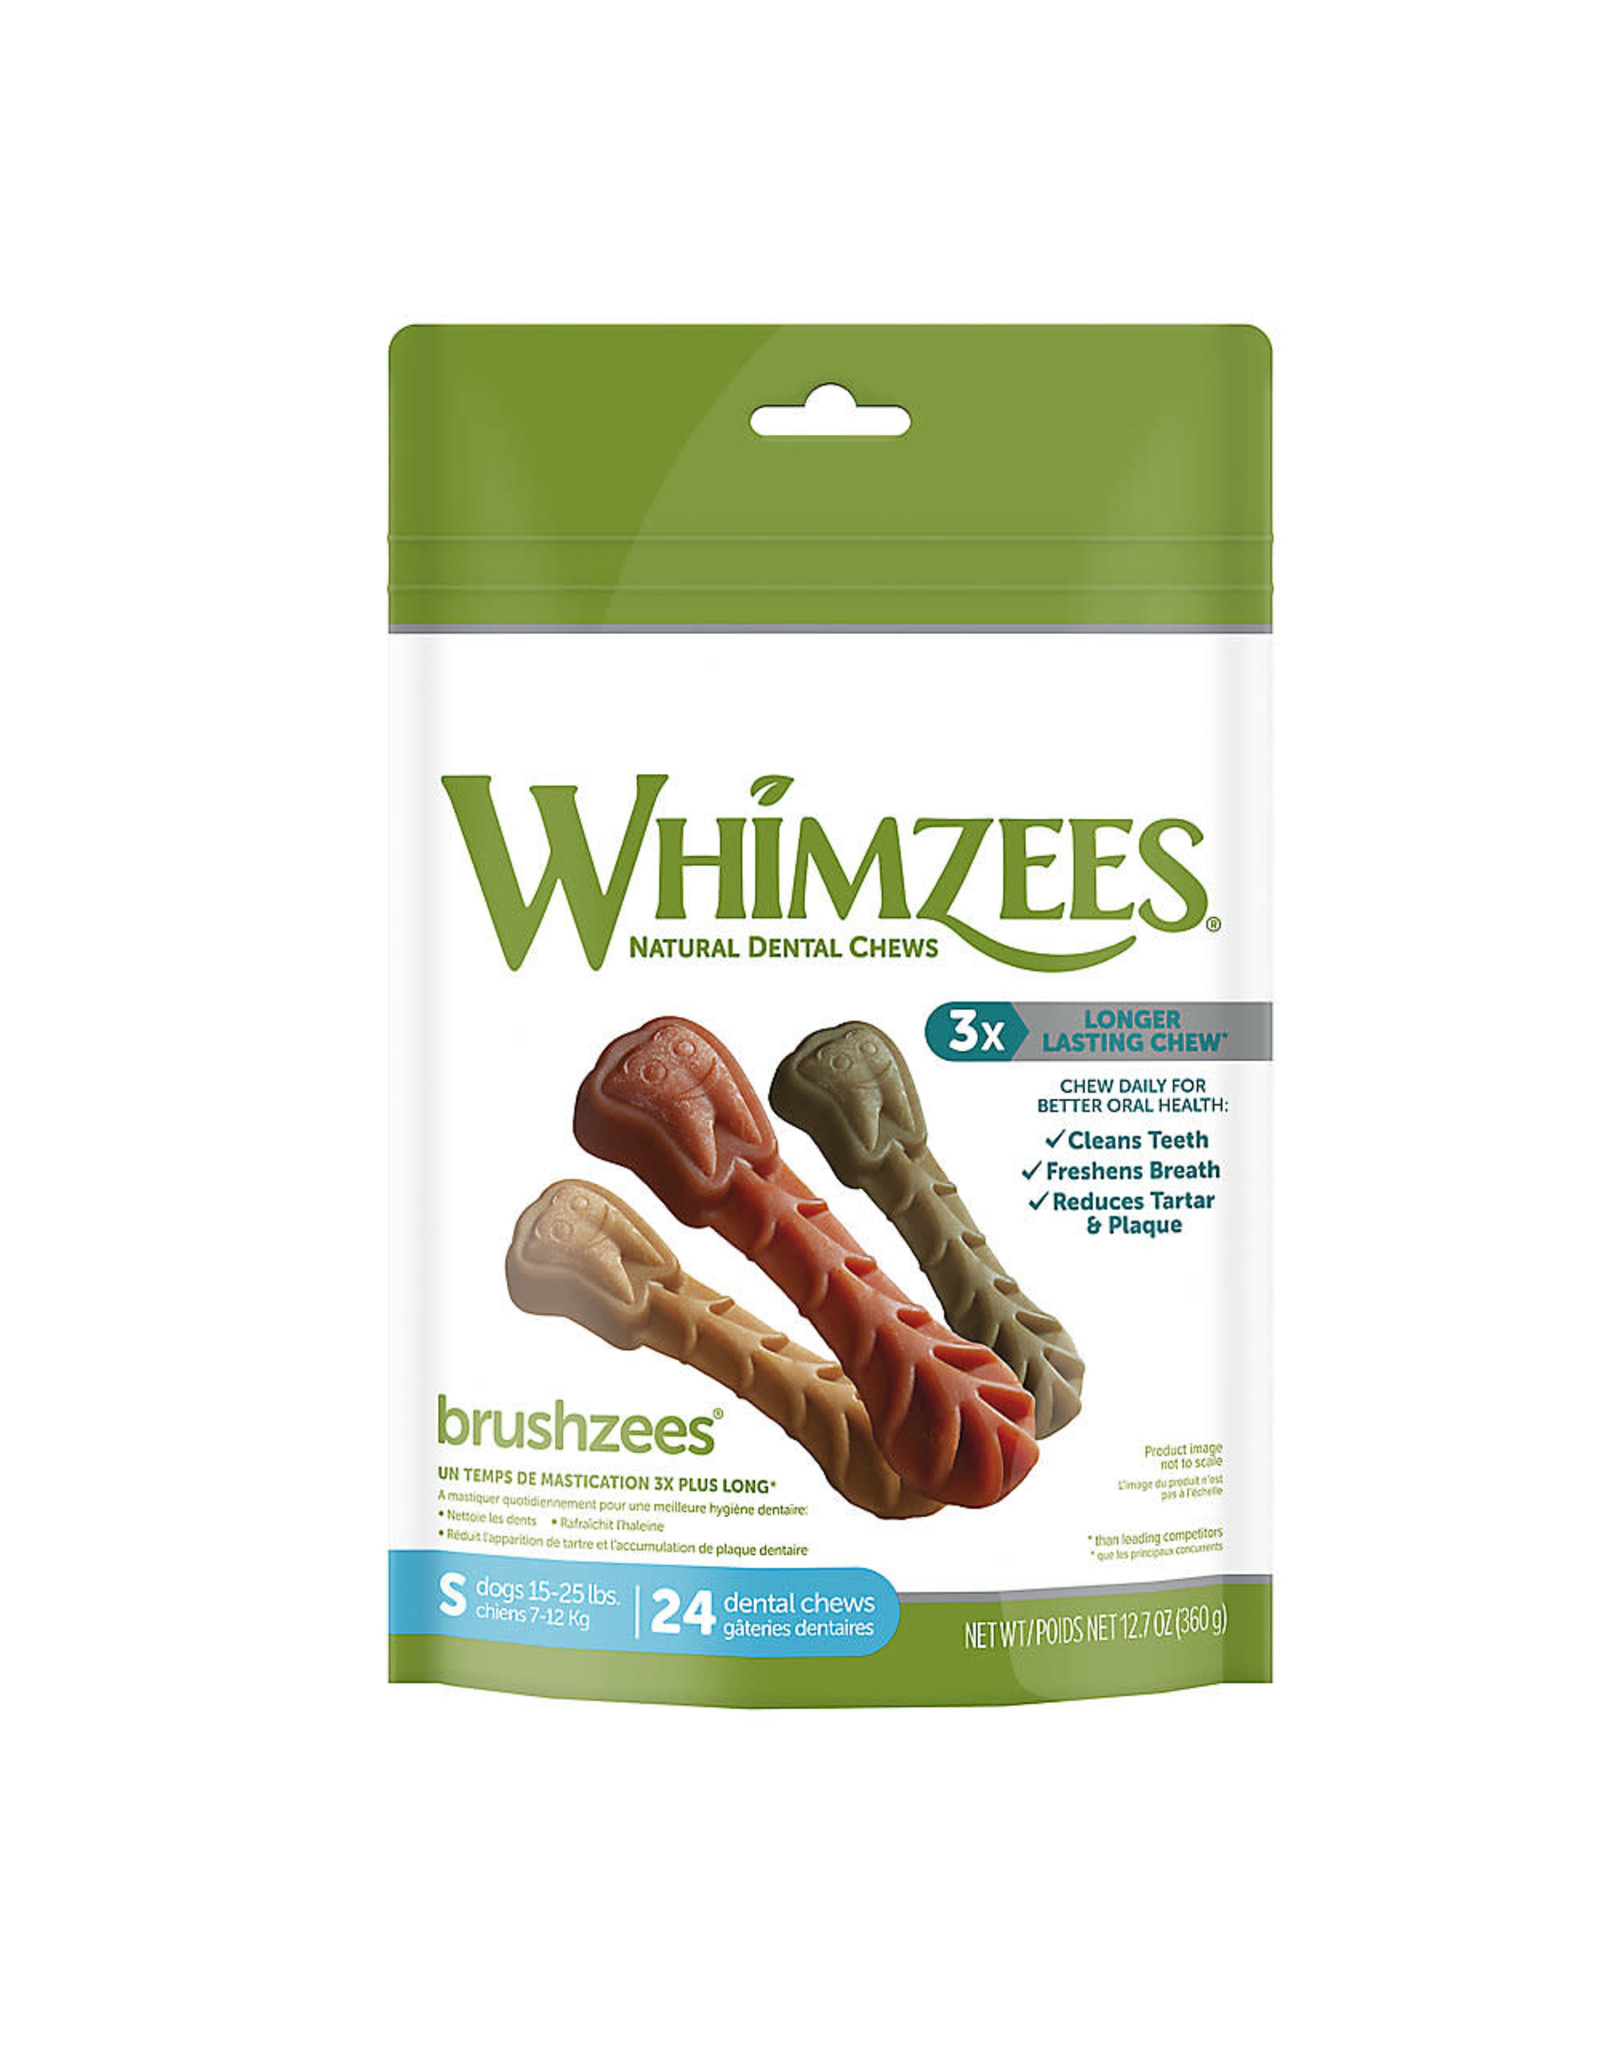 Whimzees Whimzees Brushzees Small Dental Chews for Dogs 24 Count Bag